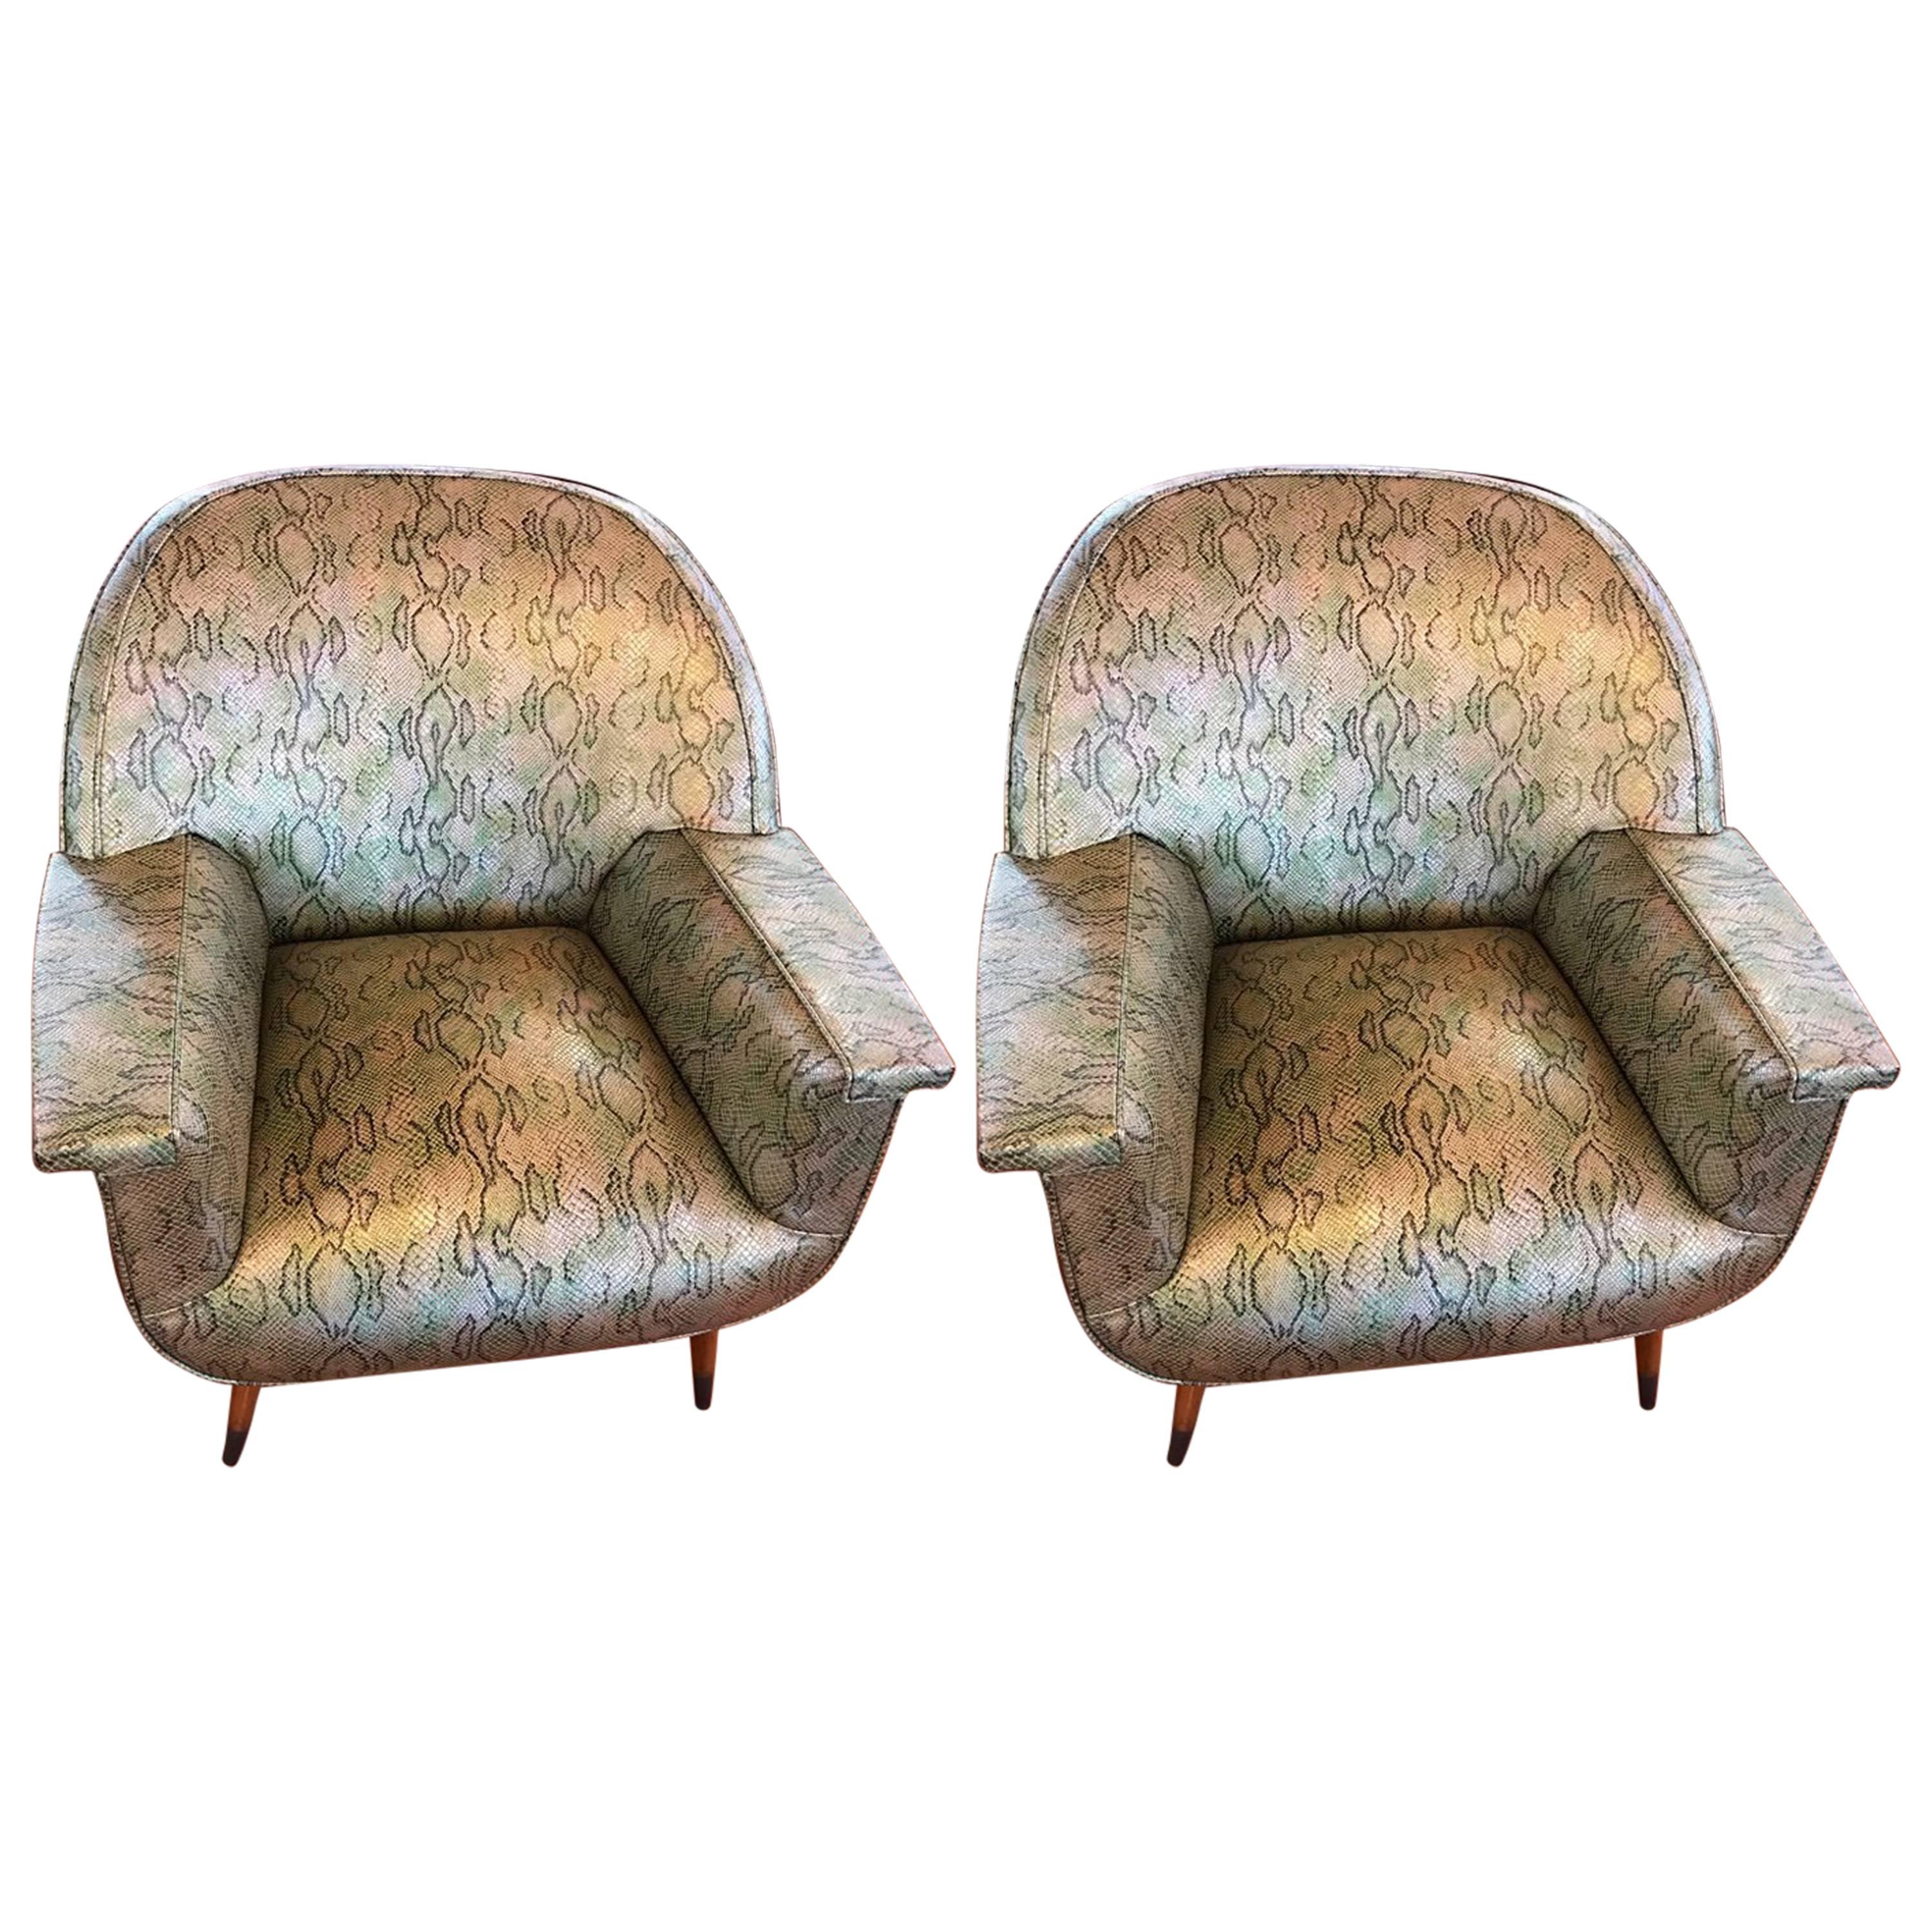 Pair of Italian Mid-Century Modern Club Chairs with Faux Snake Skin